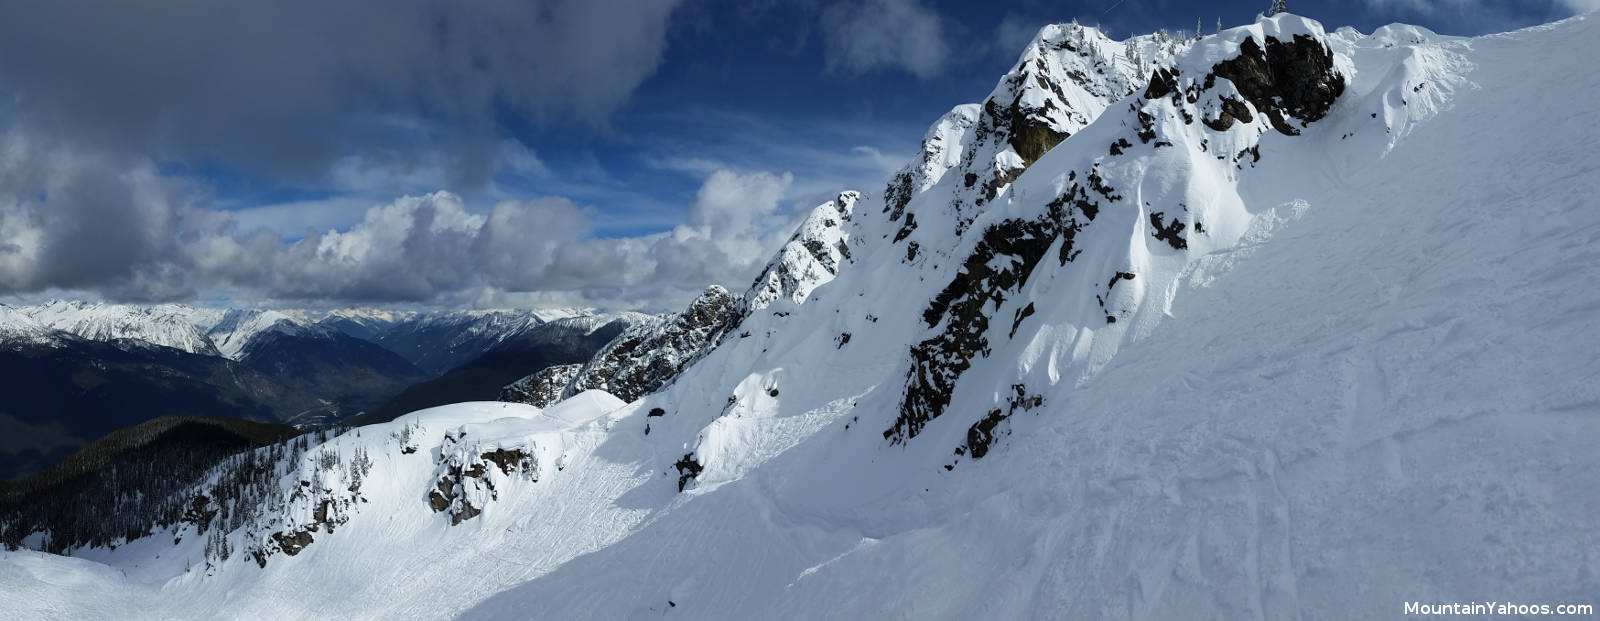 View of Greely Bowl at Revelstoke